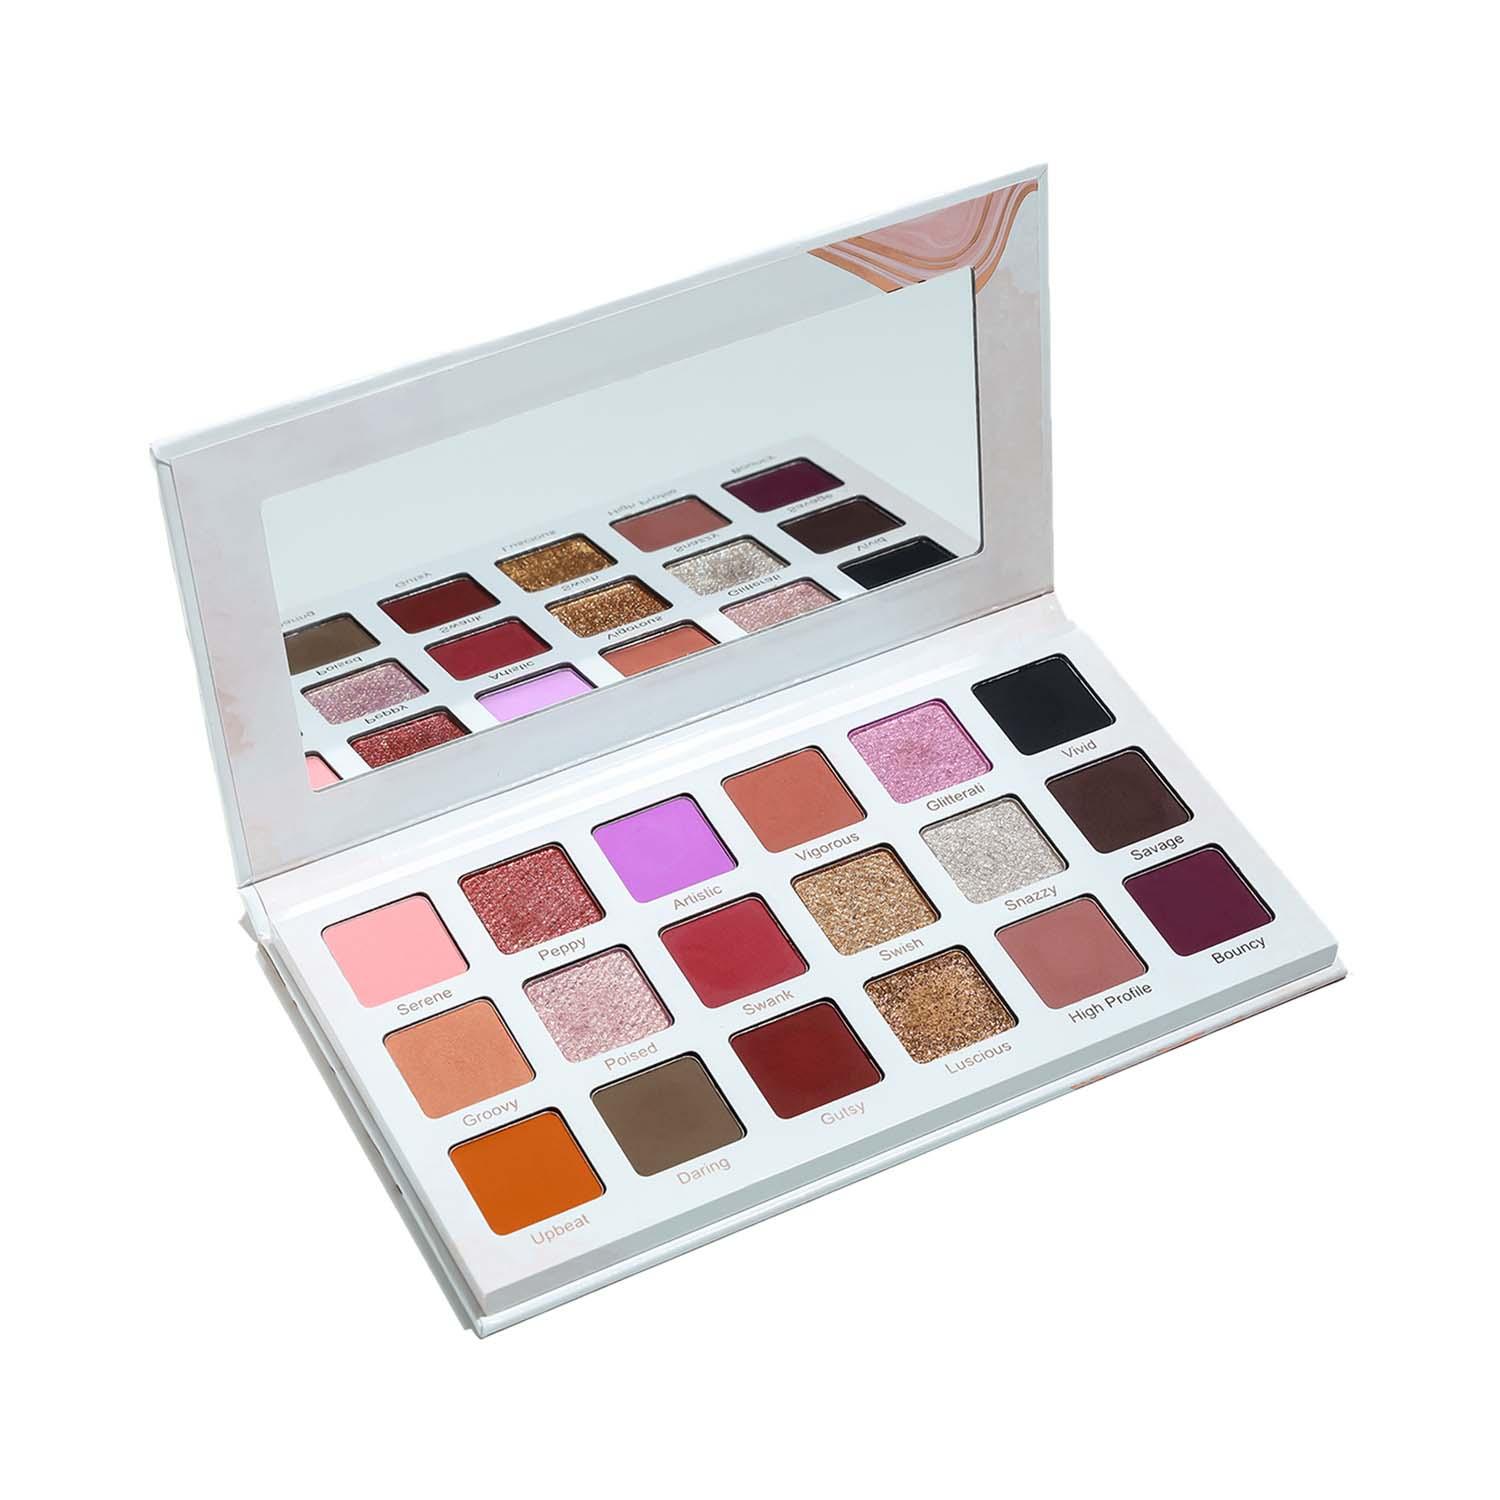 Praush Beauty | Praush Beauty Eyeshadow Palette with 18 Pigmented Shades - The Showstopper (206 g)